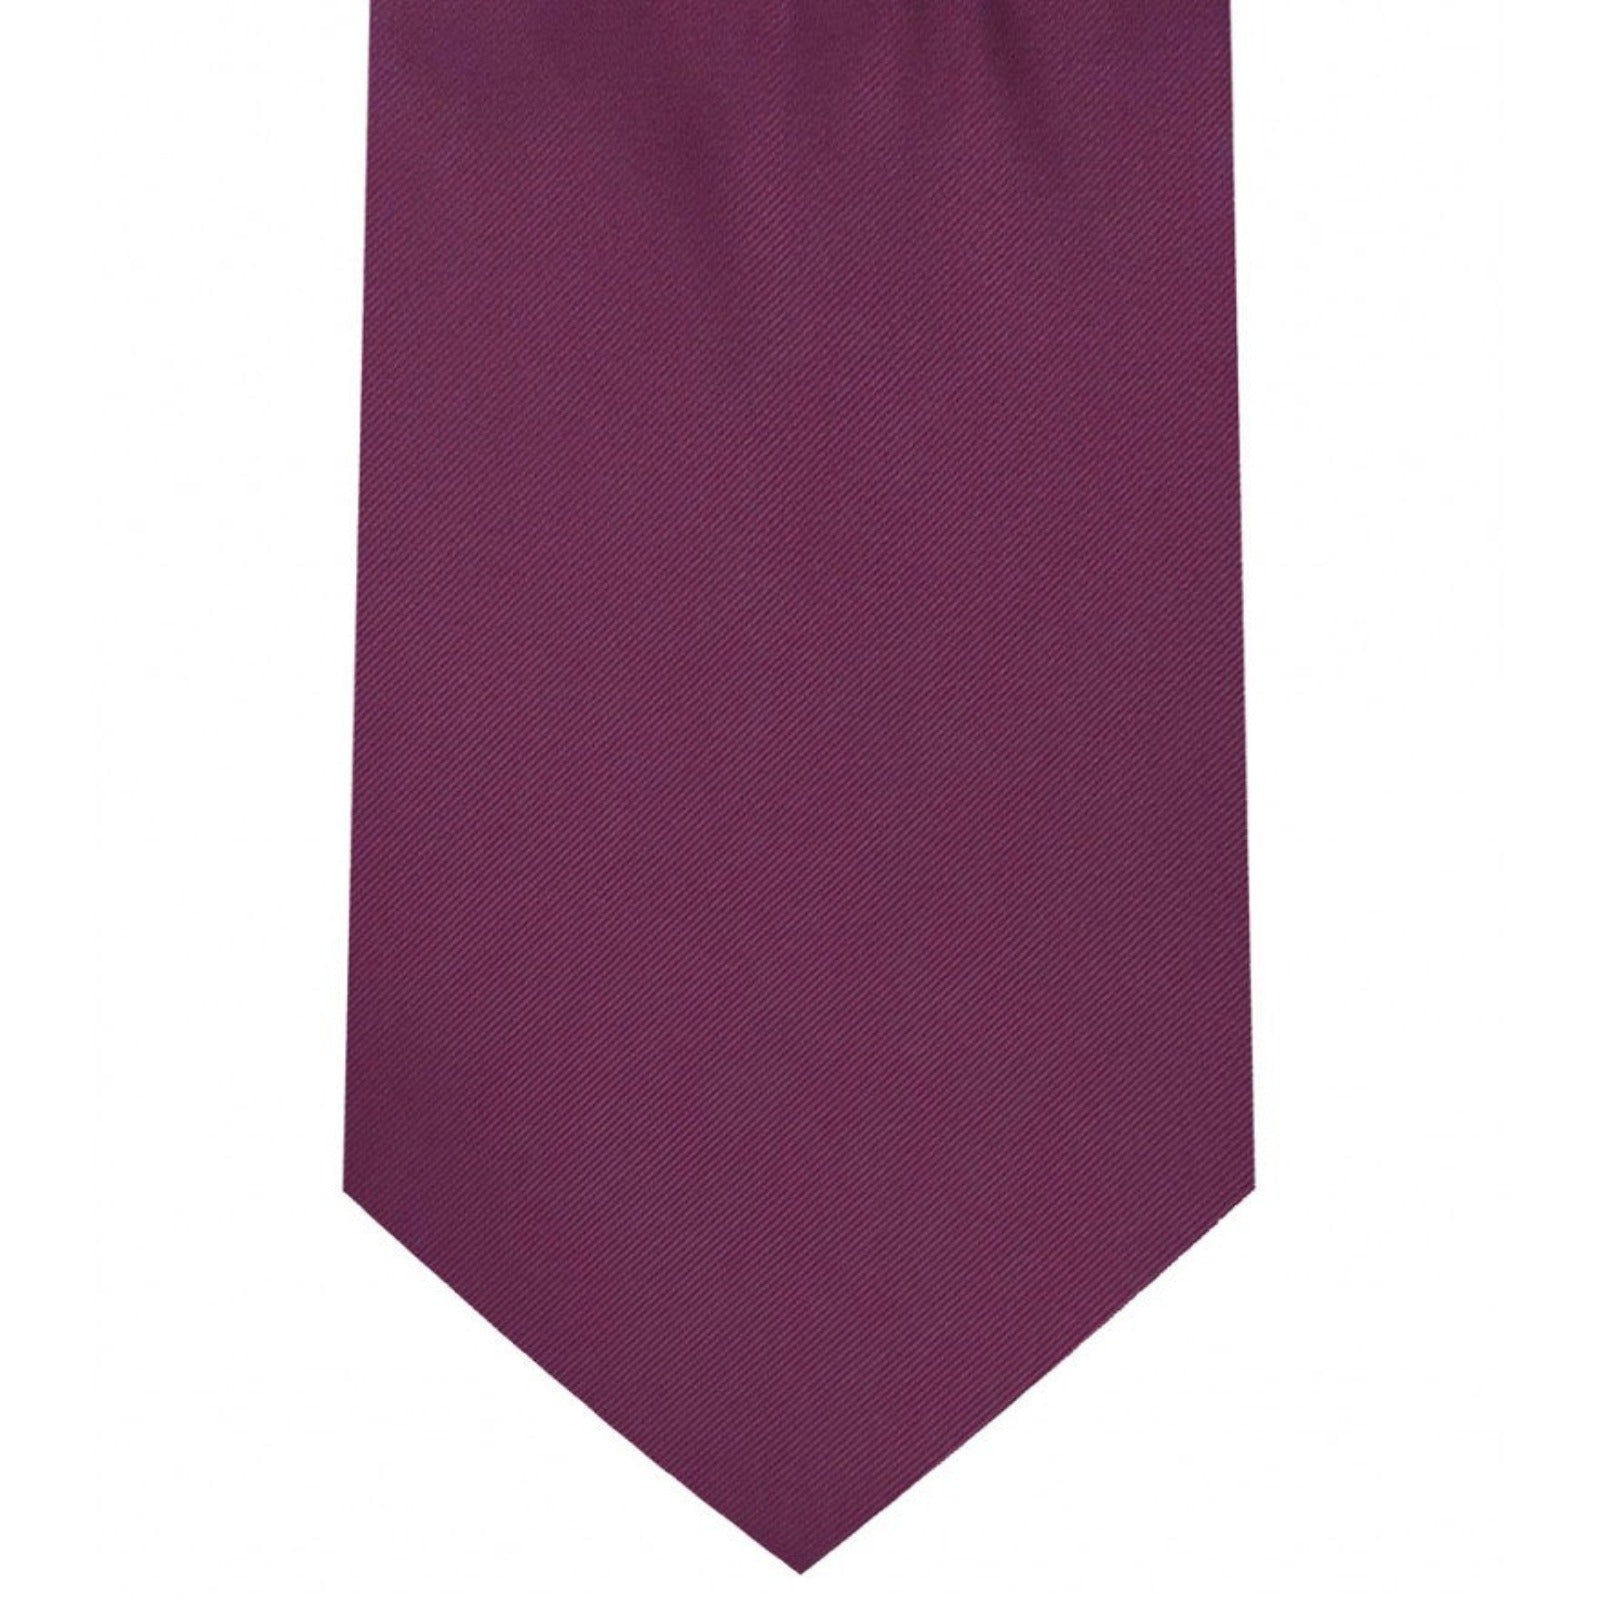 Classic Magenta Tie Regular width 3.5 inches With Matching Pocket Square | KCT Menswear